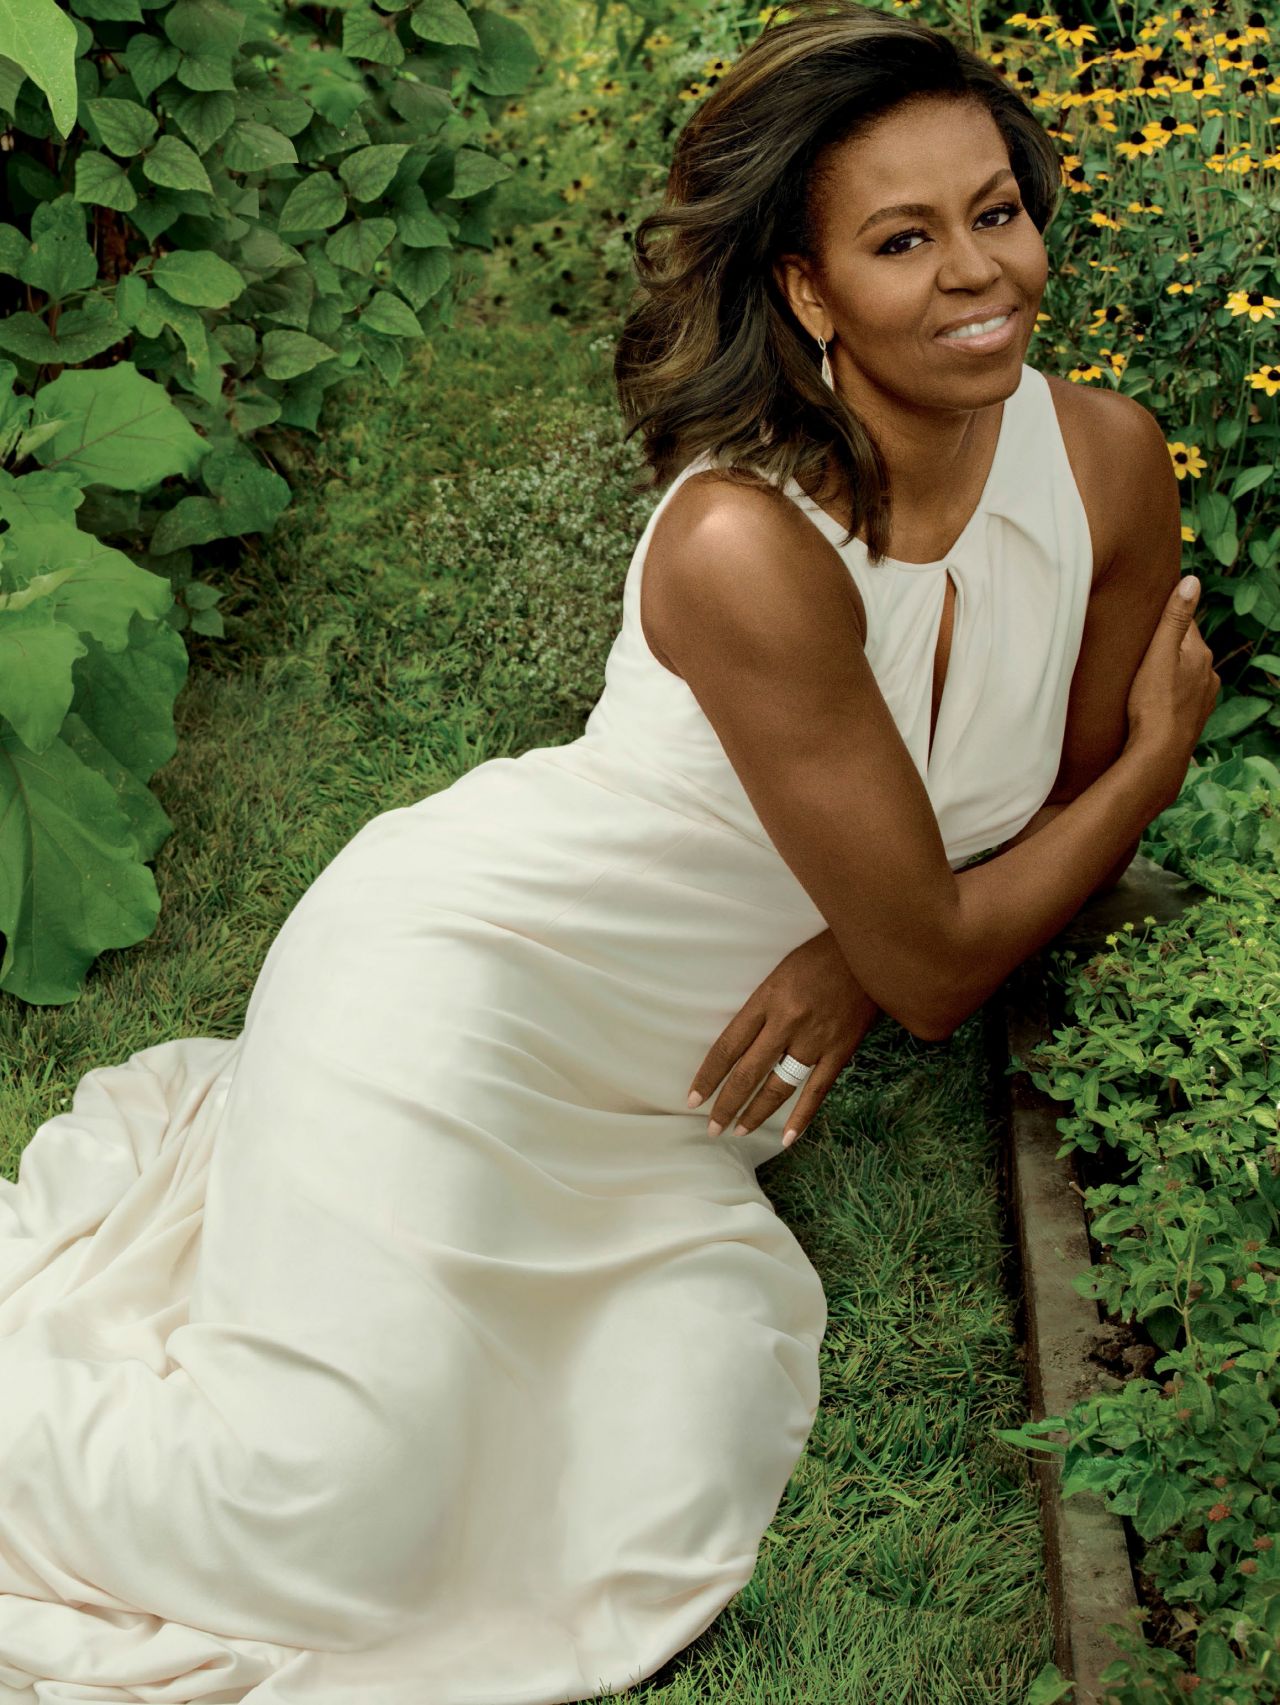 michelle-obama-photoshoot-for-vogue-us-d